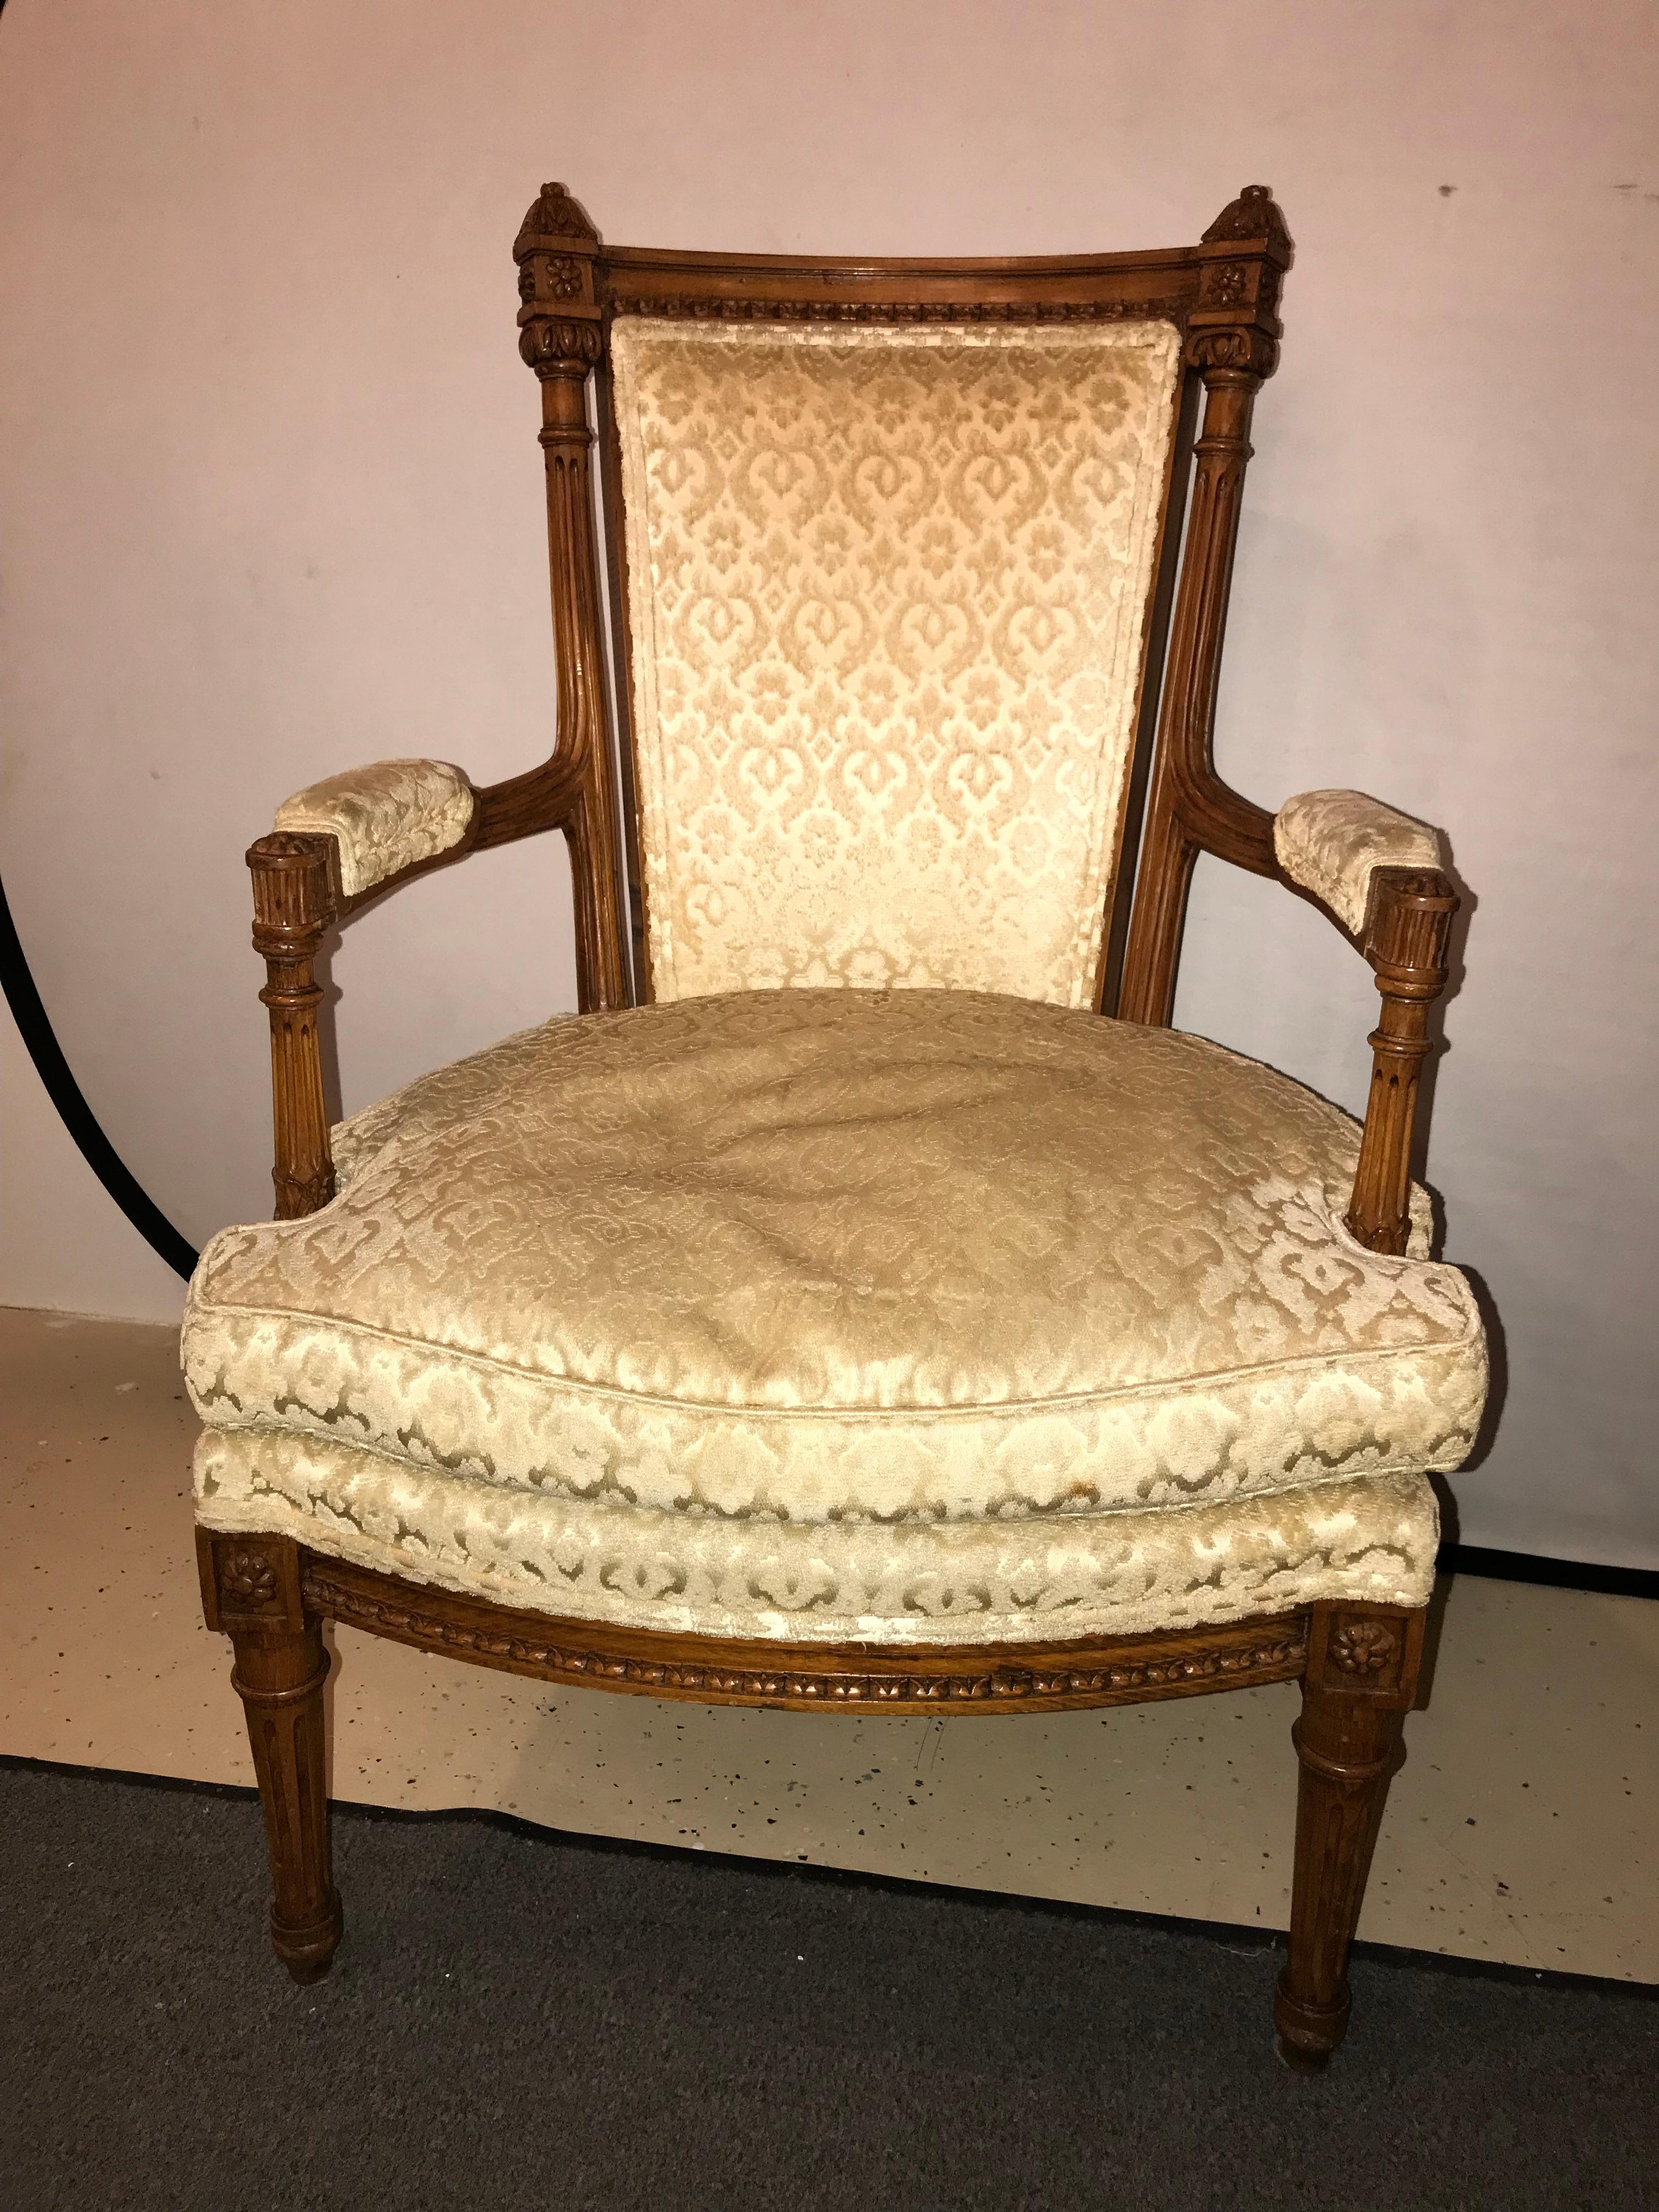 Pair of Louis XVI Style Bergere Chairs or Armchairs (Louis XVI.)